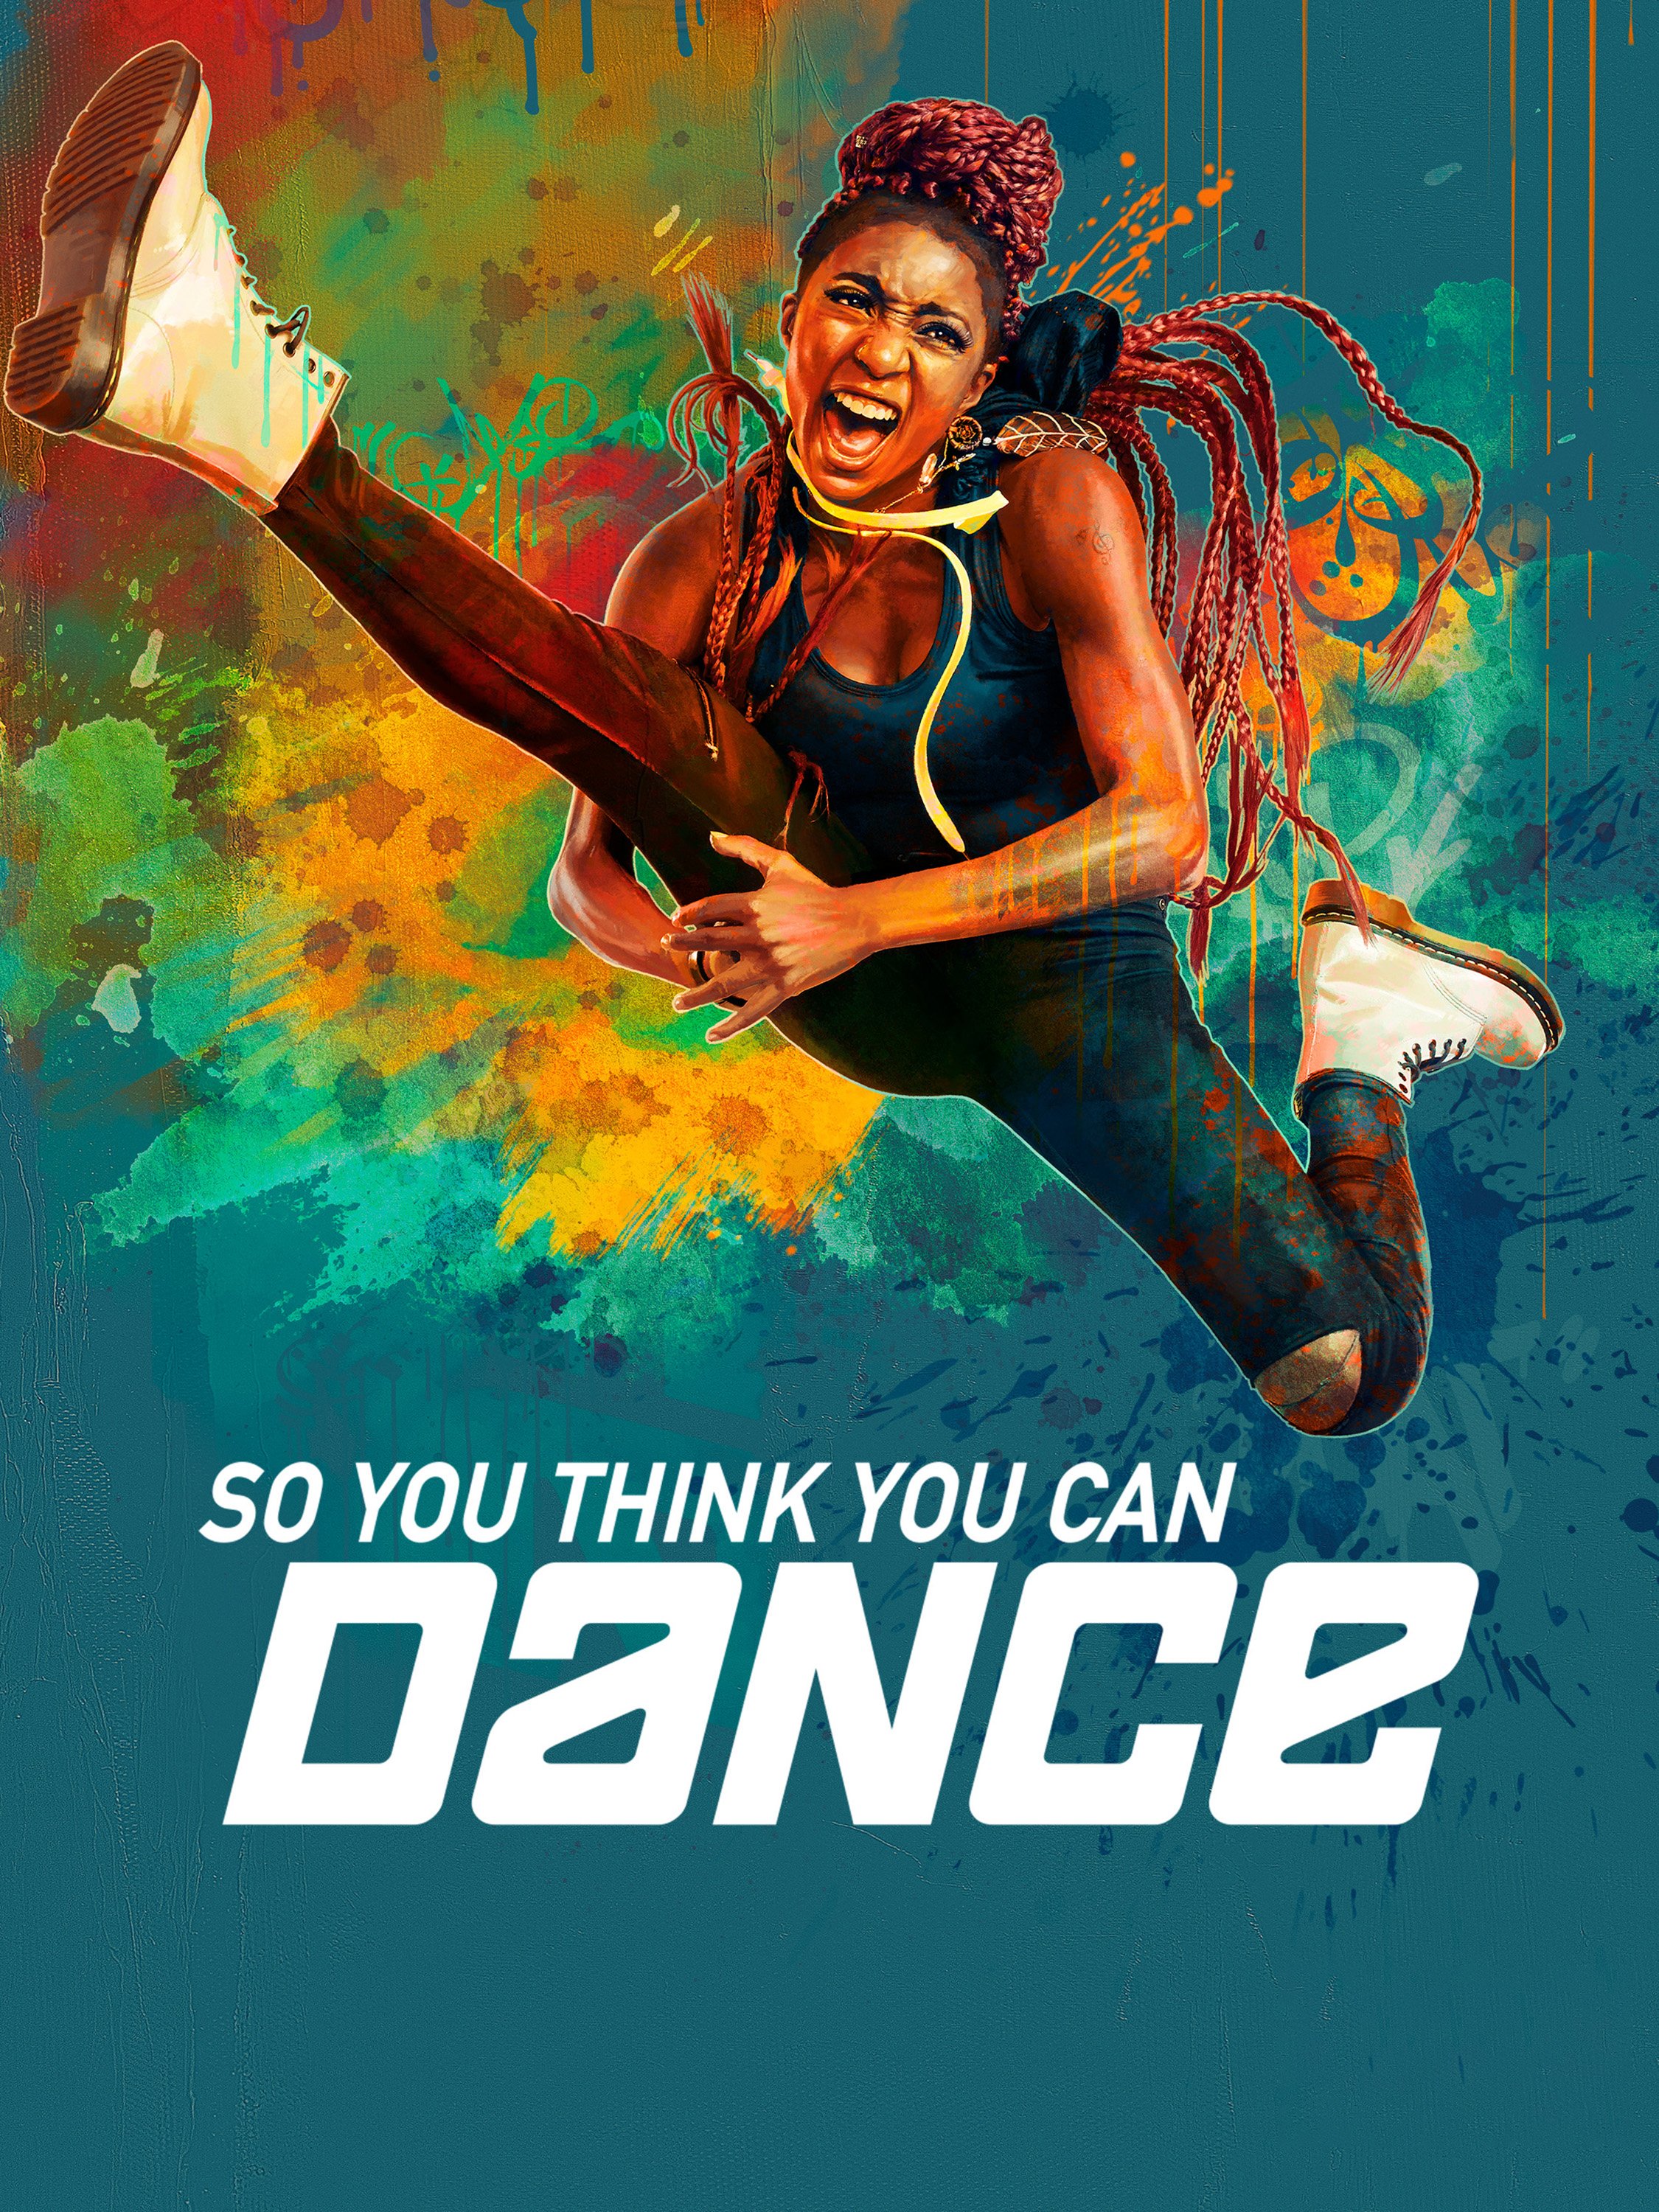 So You Think You Can Dance.jpeg